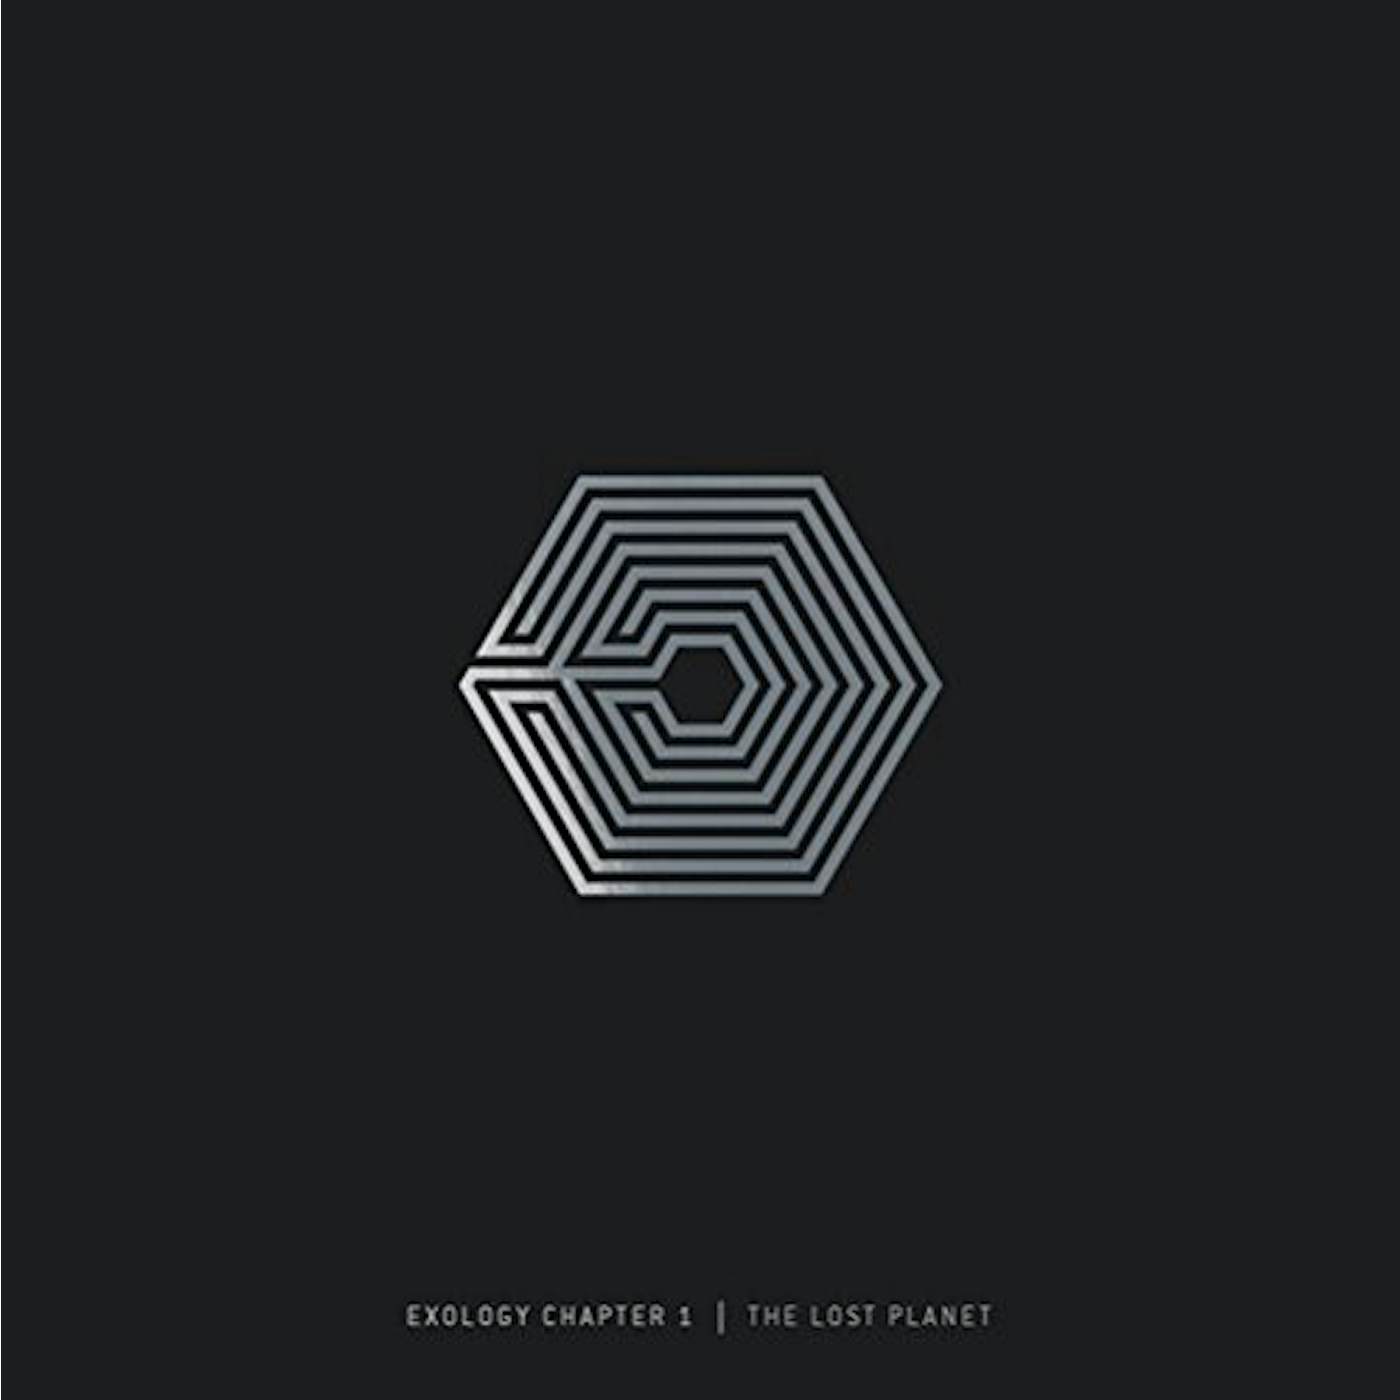 EXOLOGY CHAPTER 1: THE LOST PLANET (SPECIAL ED.) CD